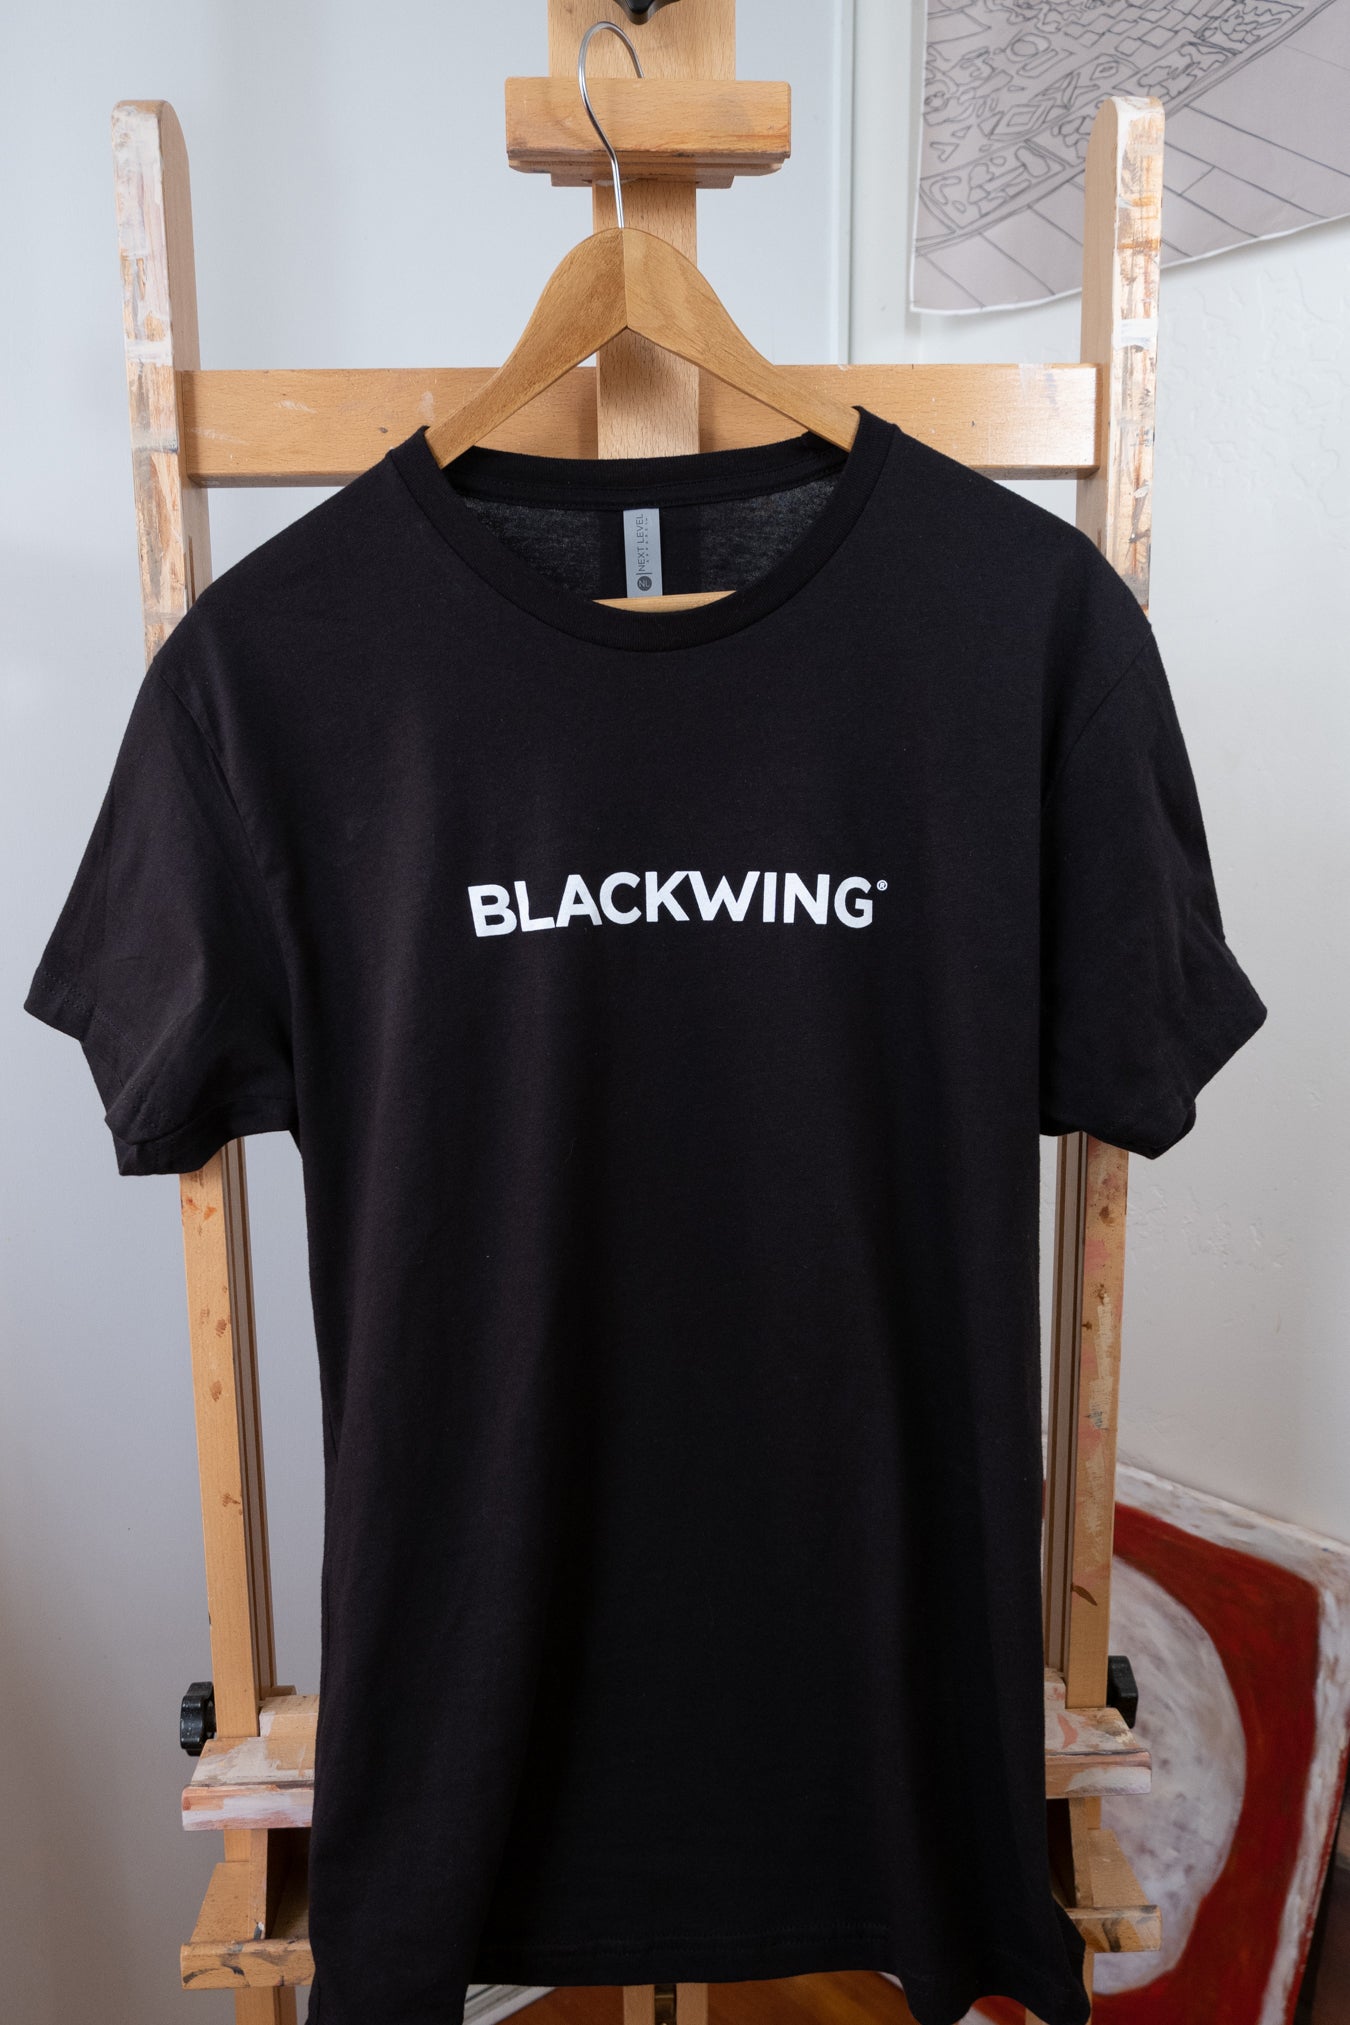 A Blackwing Logo Shirt hanging on an easel in California.